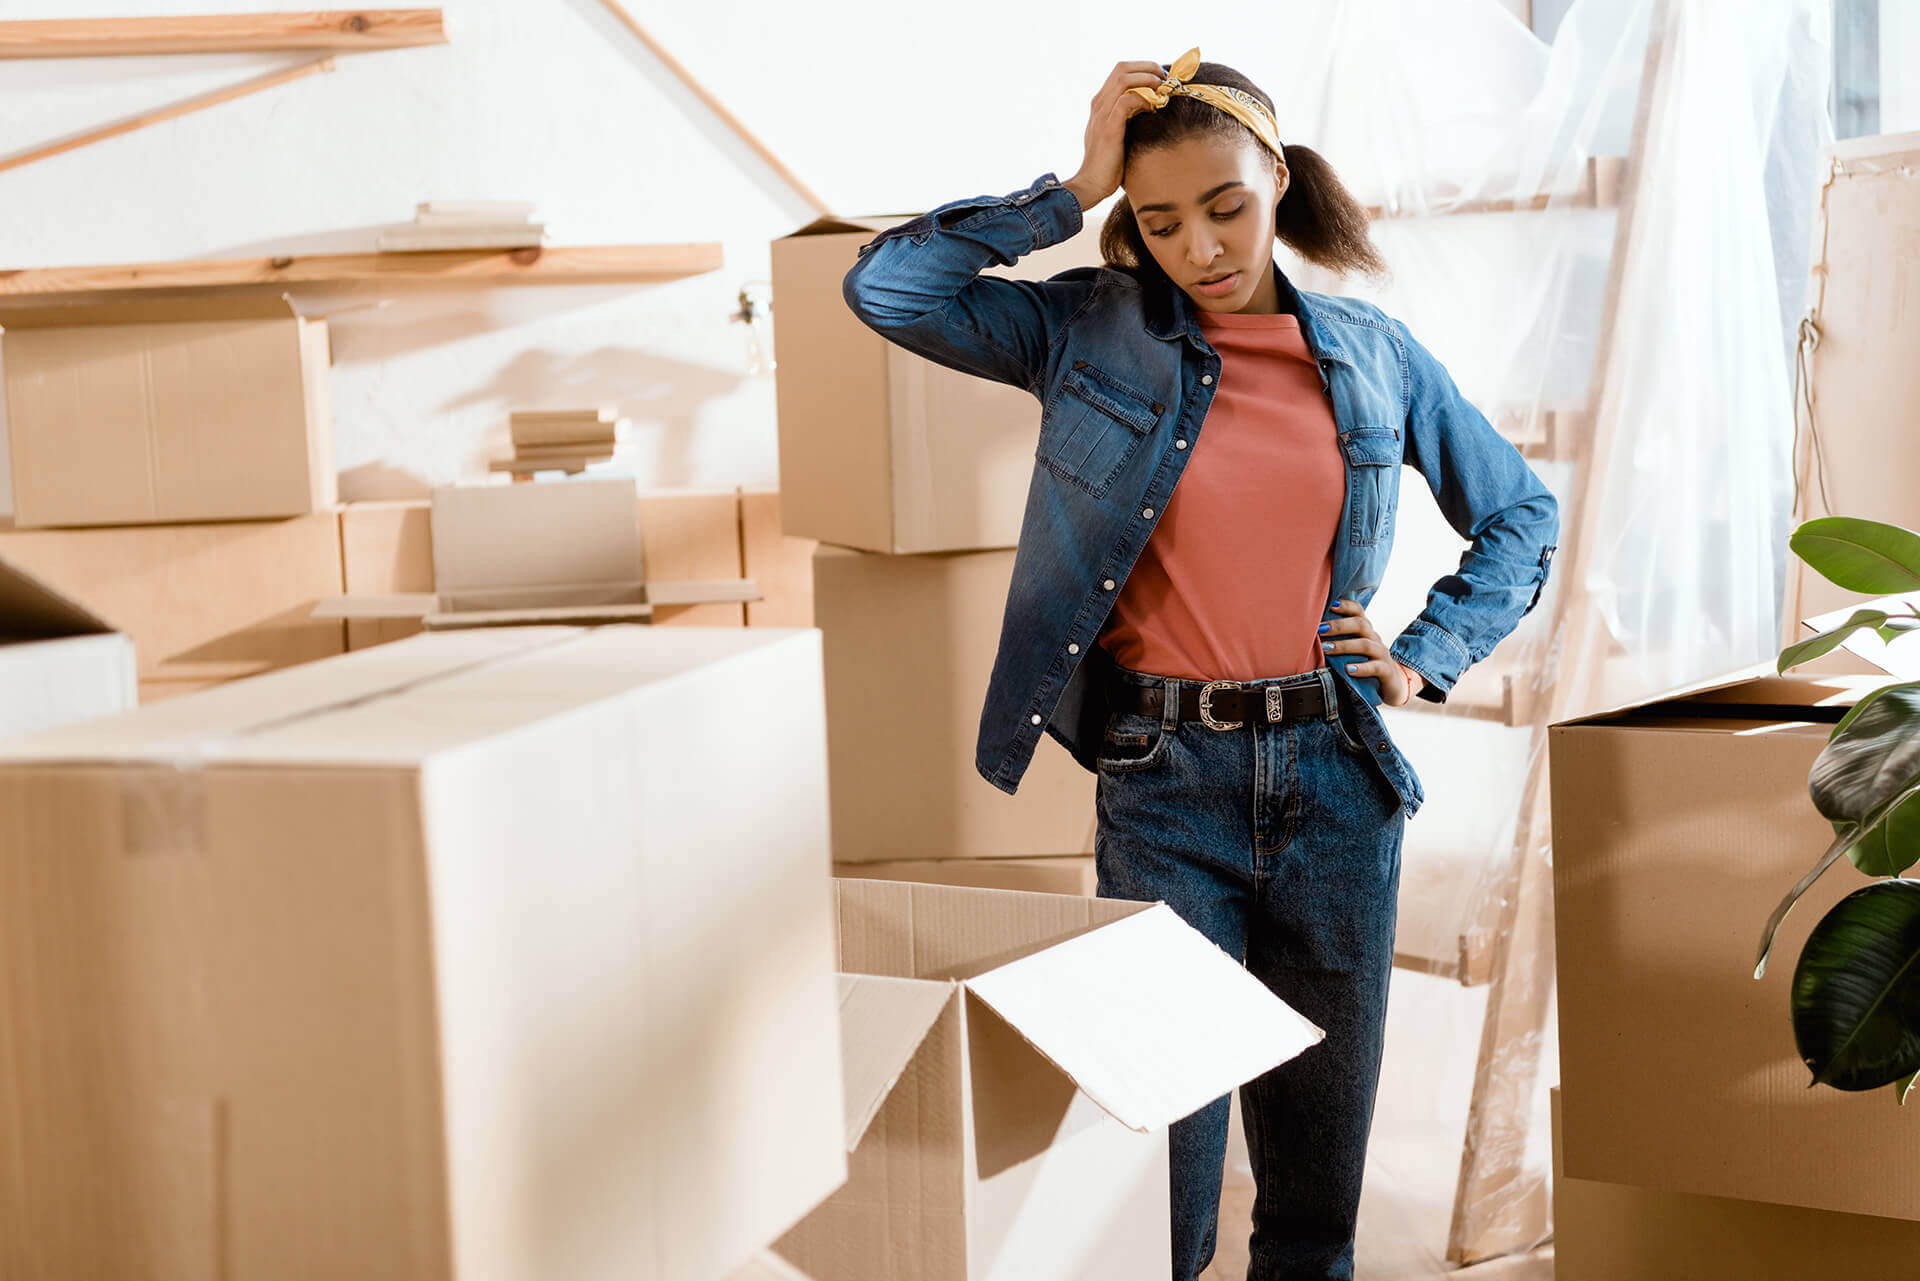 Girl with boxes worried about moving out for the first time without the help of Los Angeles movers